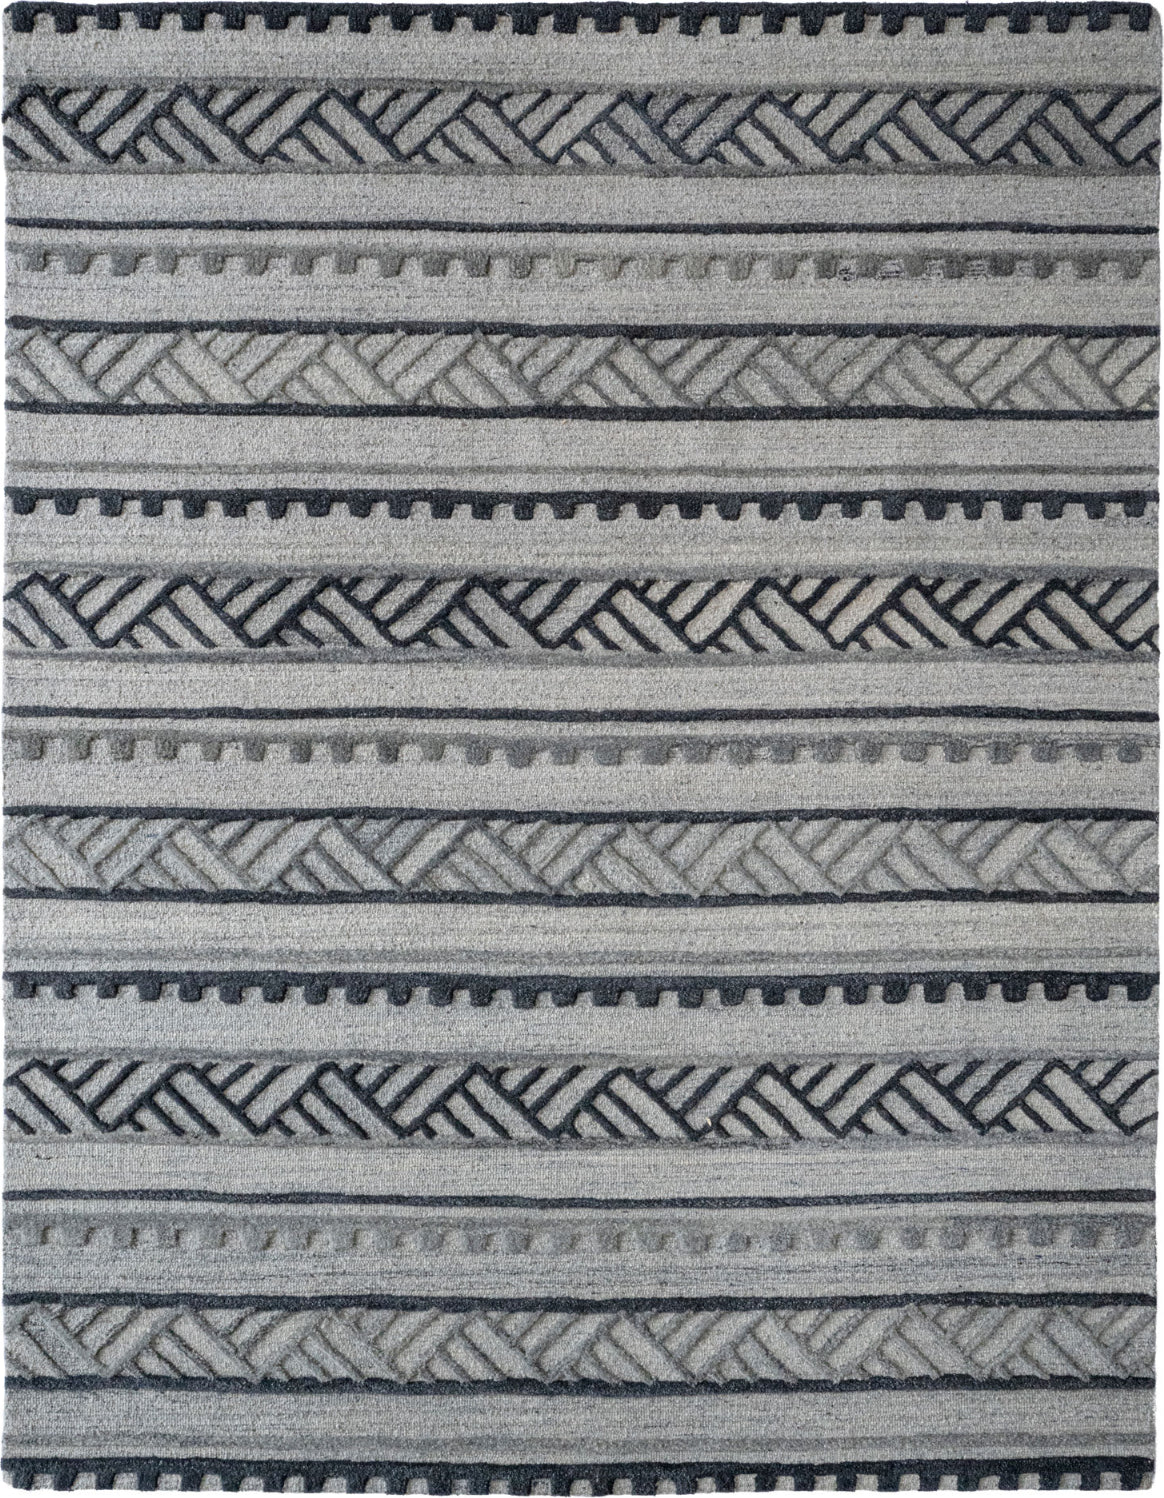 Capel Criss-Cross 9300 Graphite Area Rug by Genevieve Gorder Rugs main image